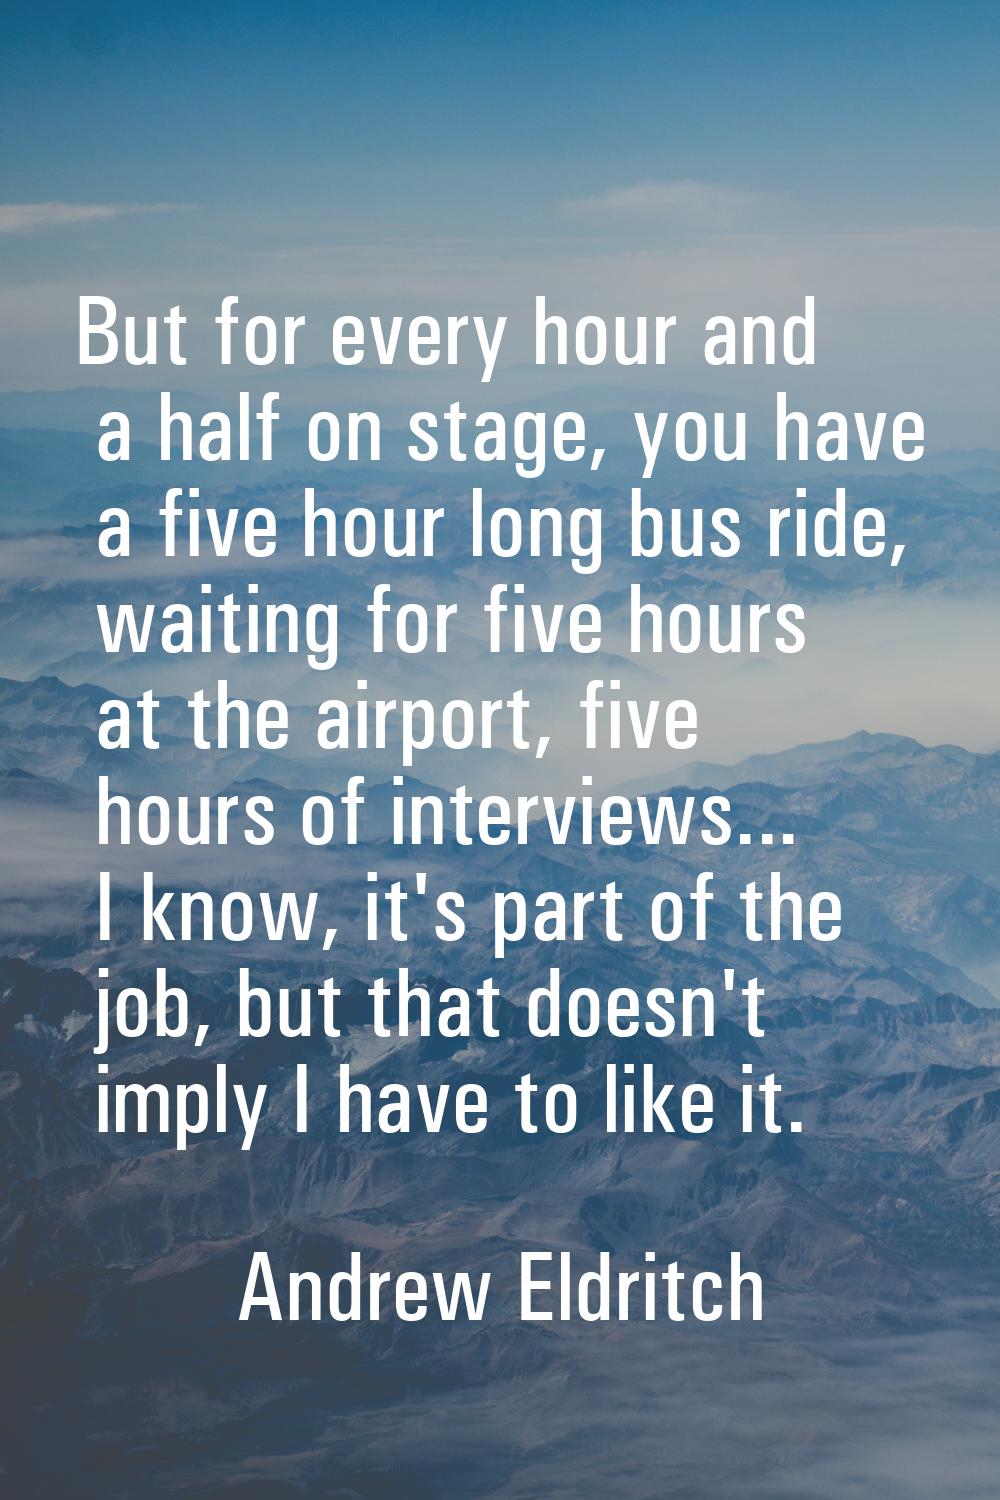 But for every hour and a half on stage, you have a five hour long bus ride, waiting for five hours 